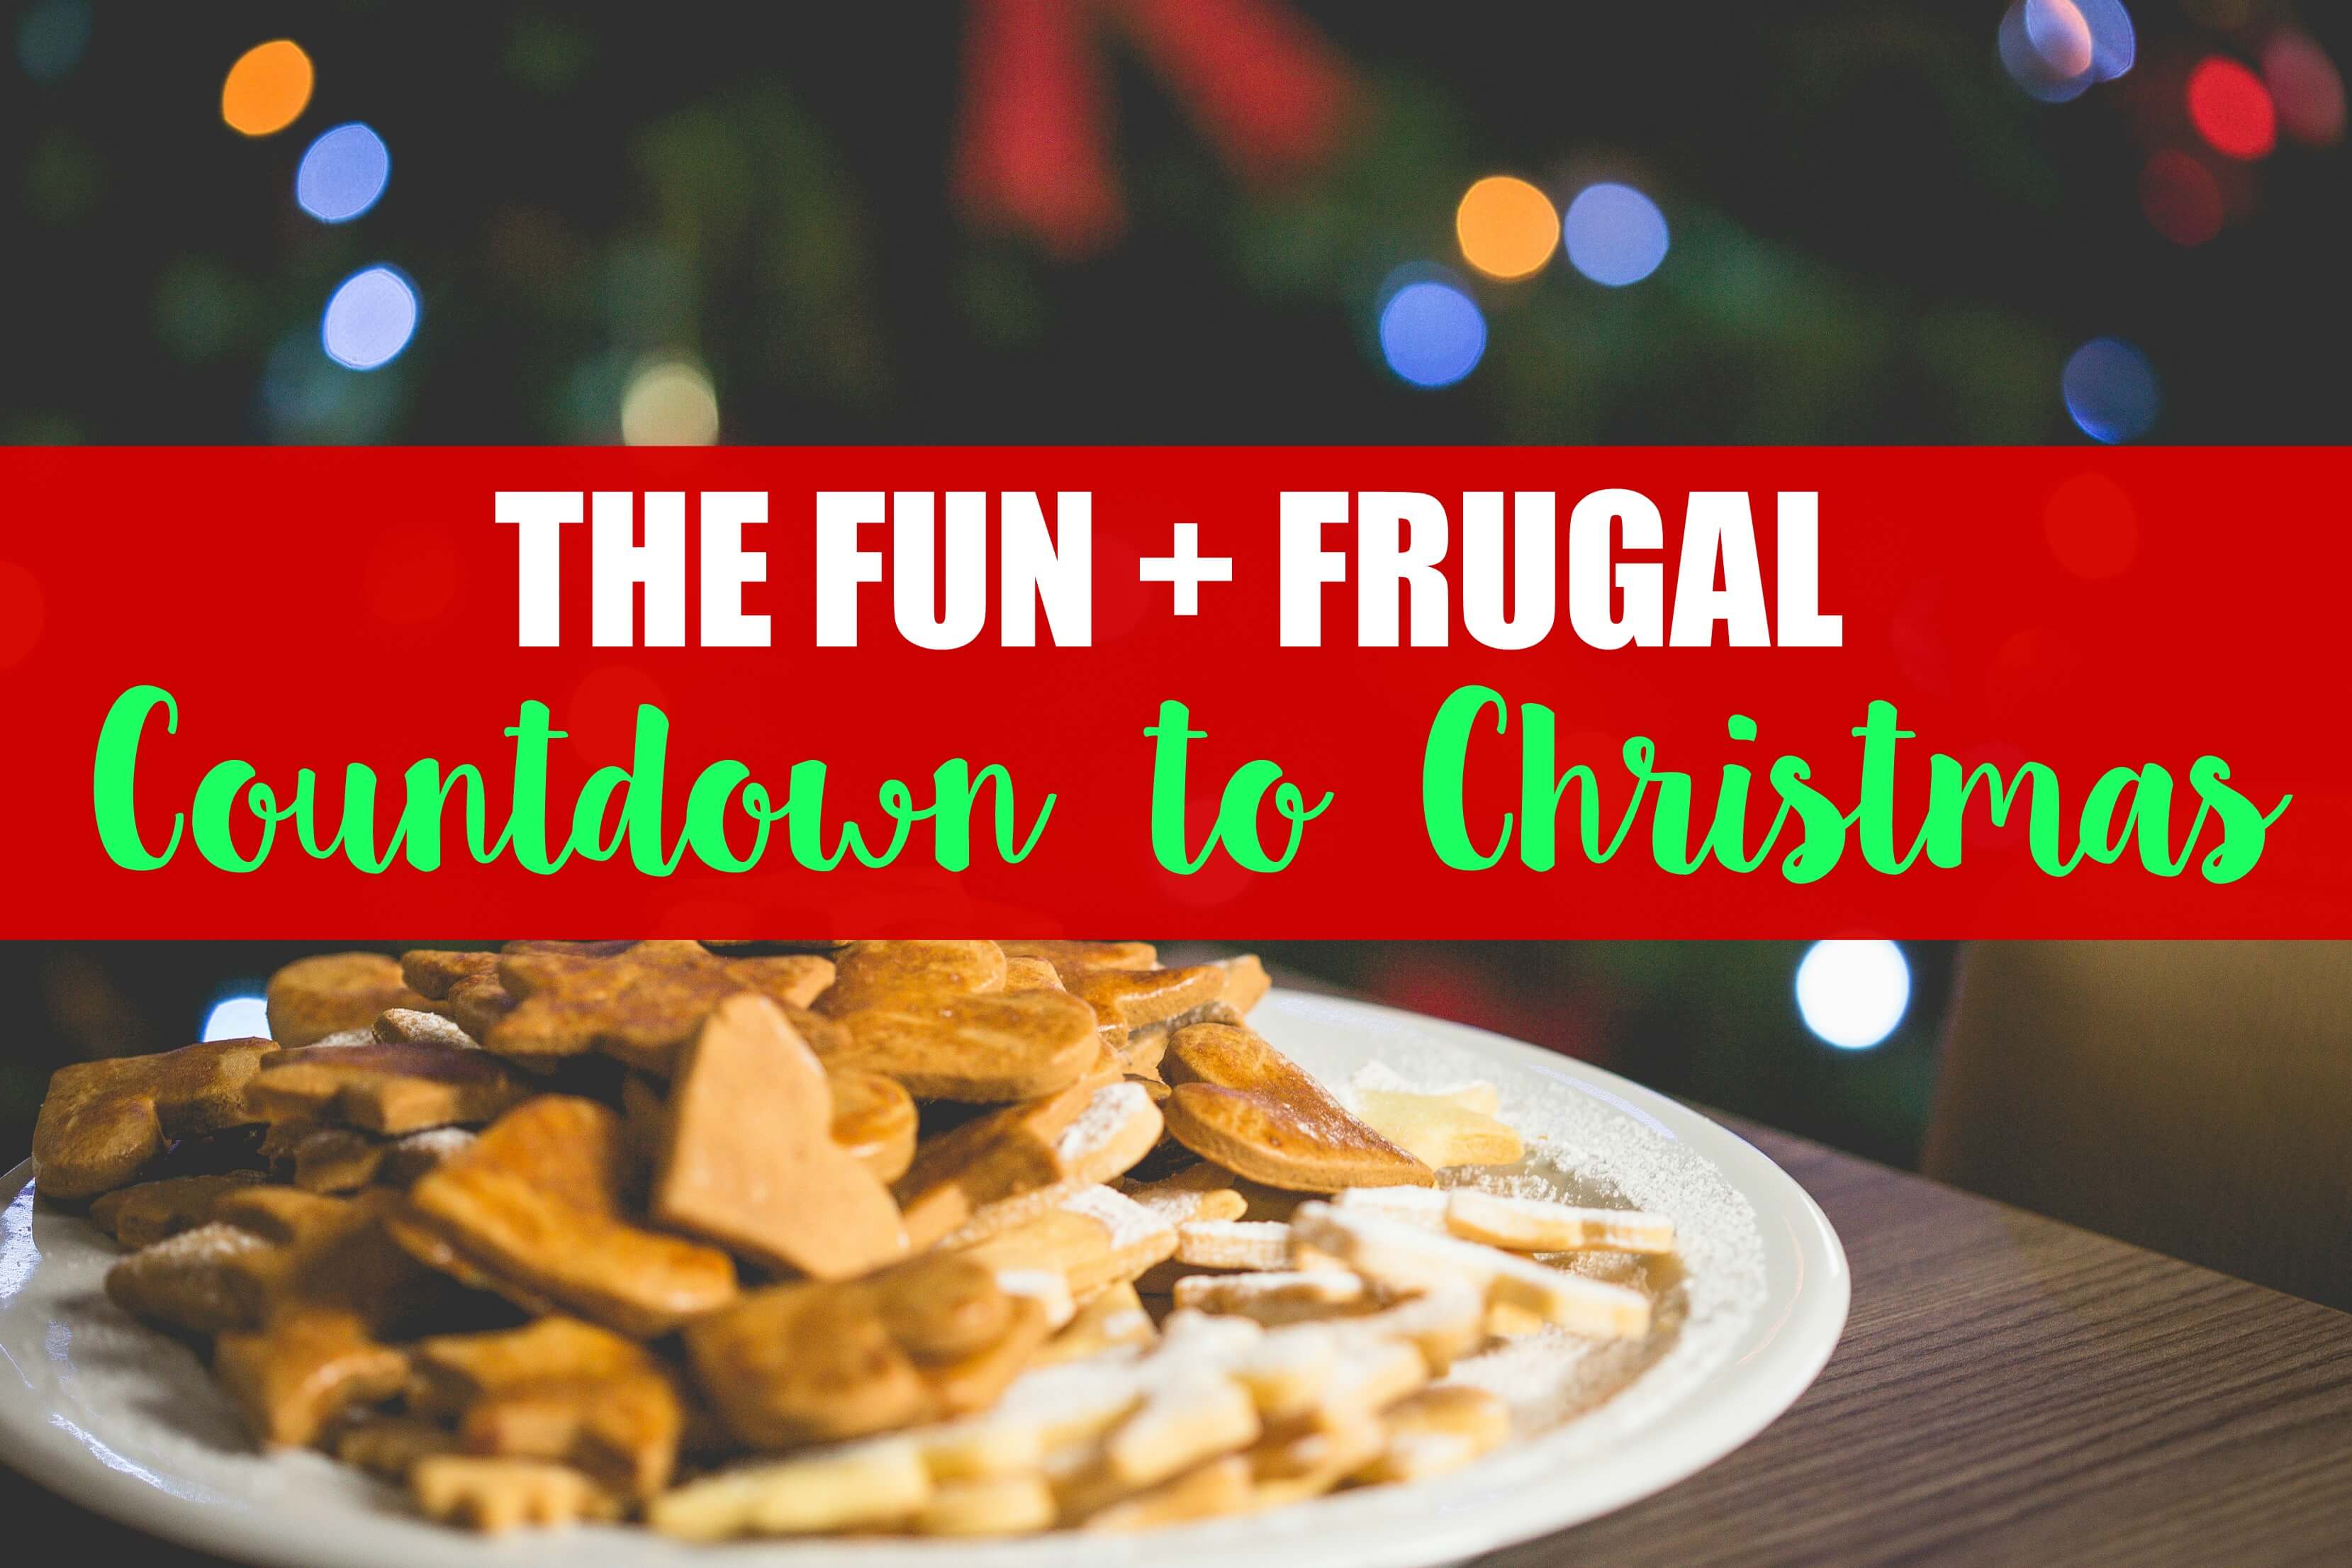 The Fun & Frugal Countdown to Christmas